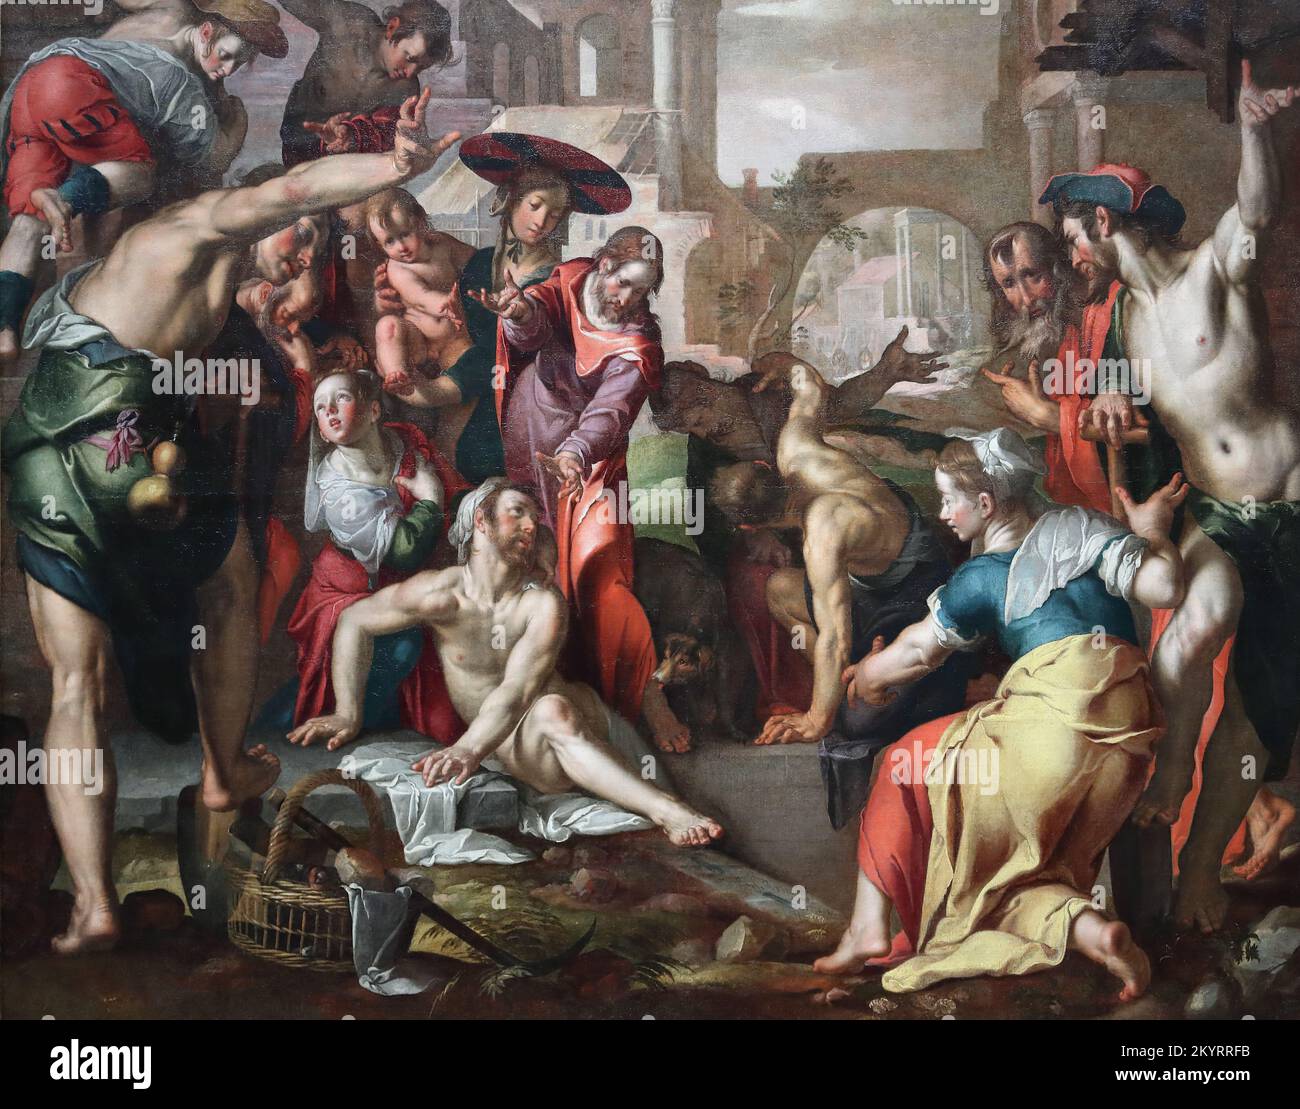 The Resurrection of Lazarus by Dutch Mannerist painter Joachim Wtewael at the National Gallery, London, UK Stock Photo